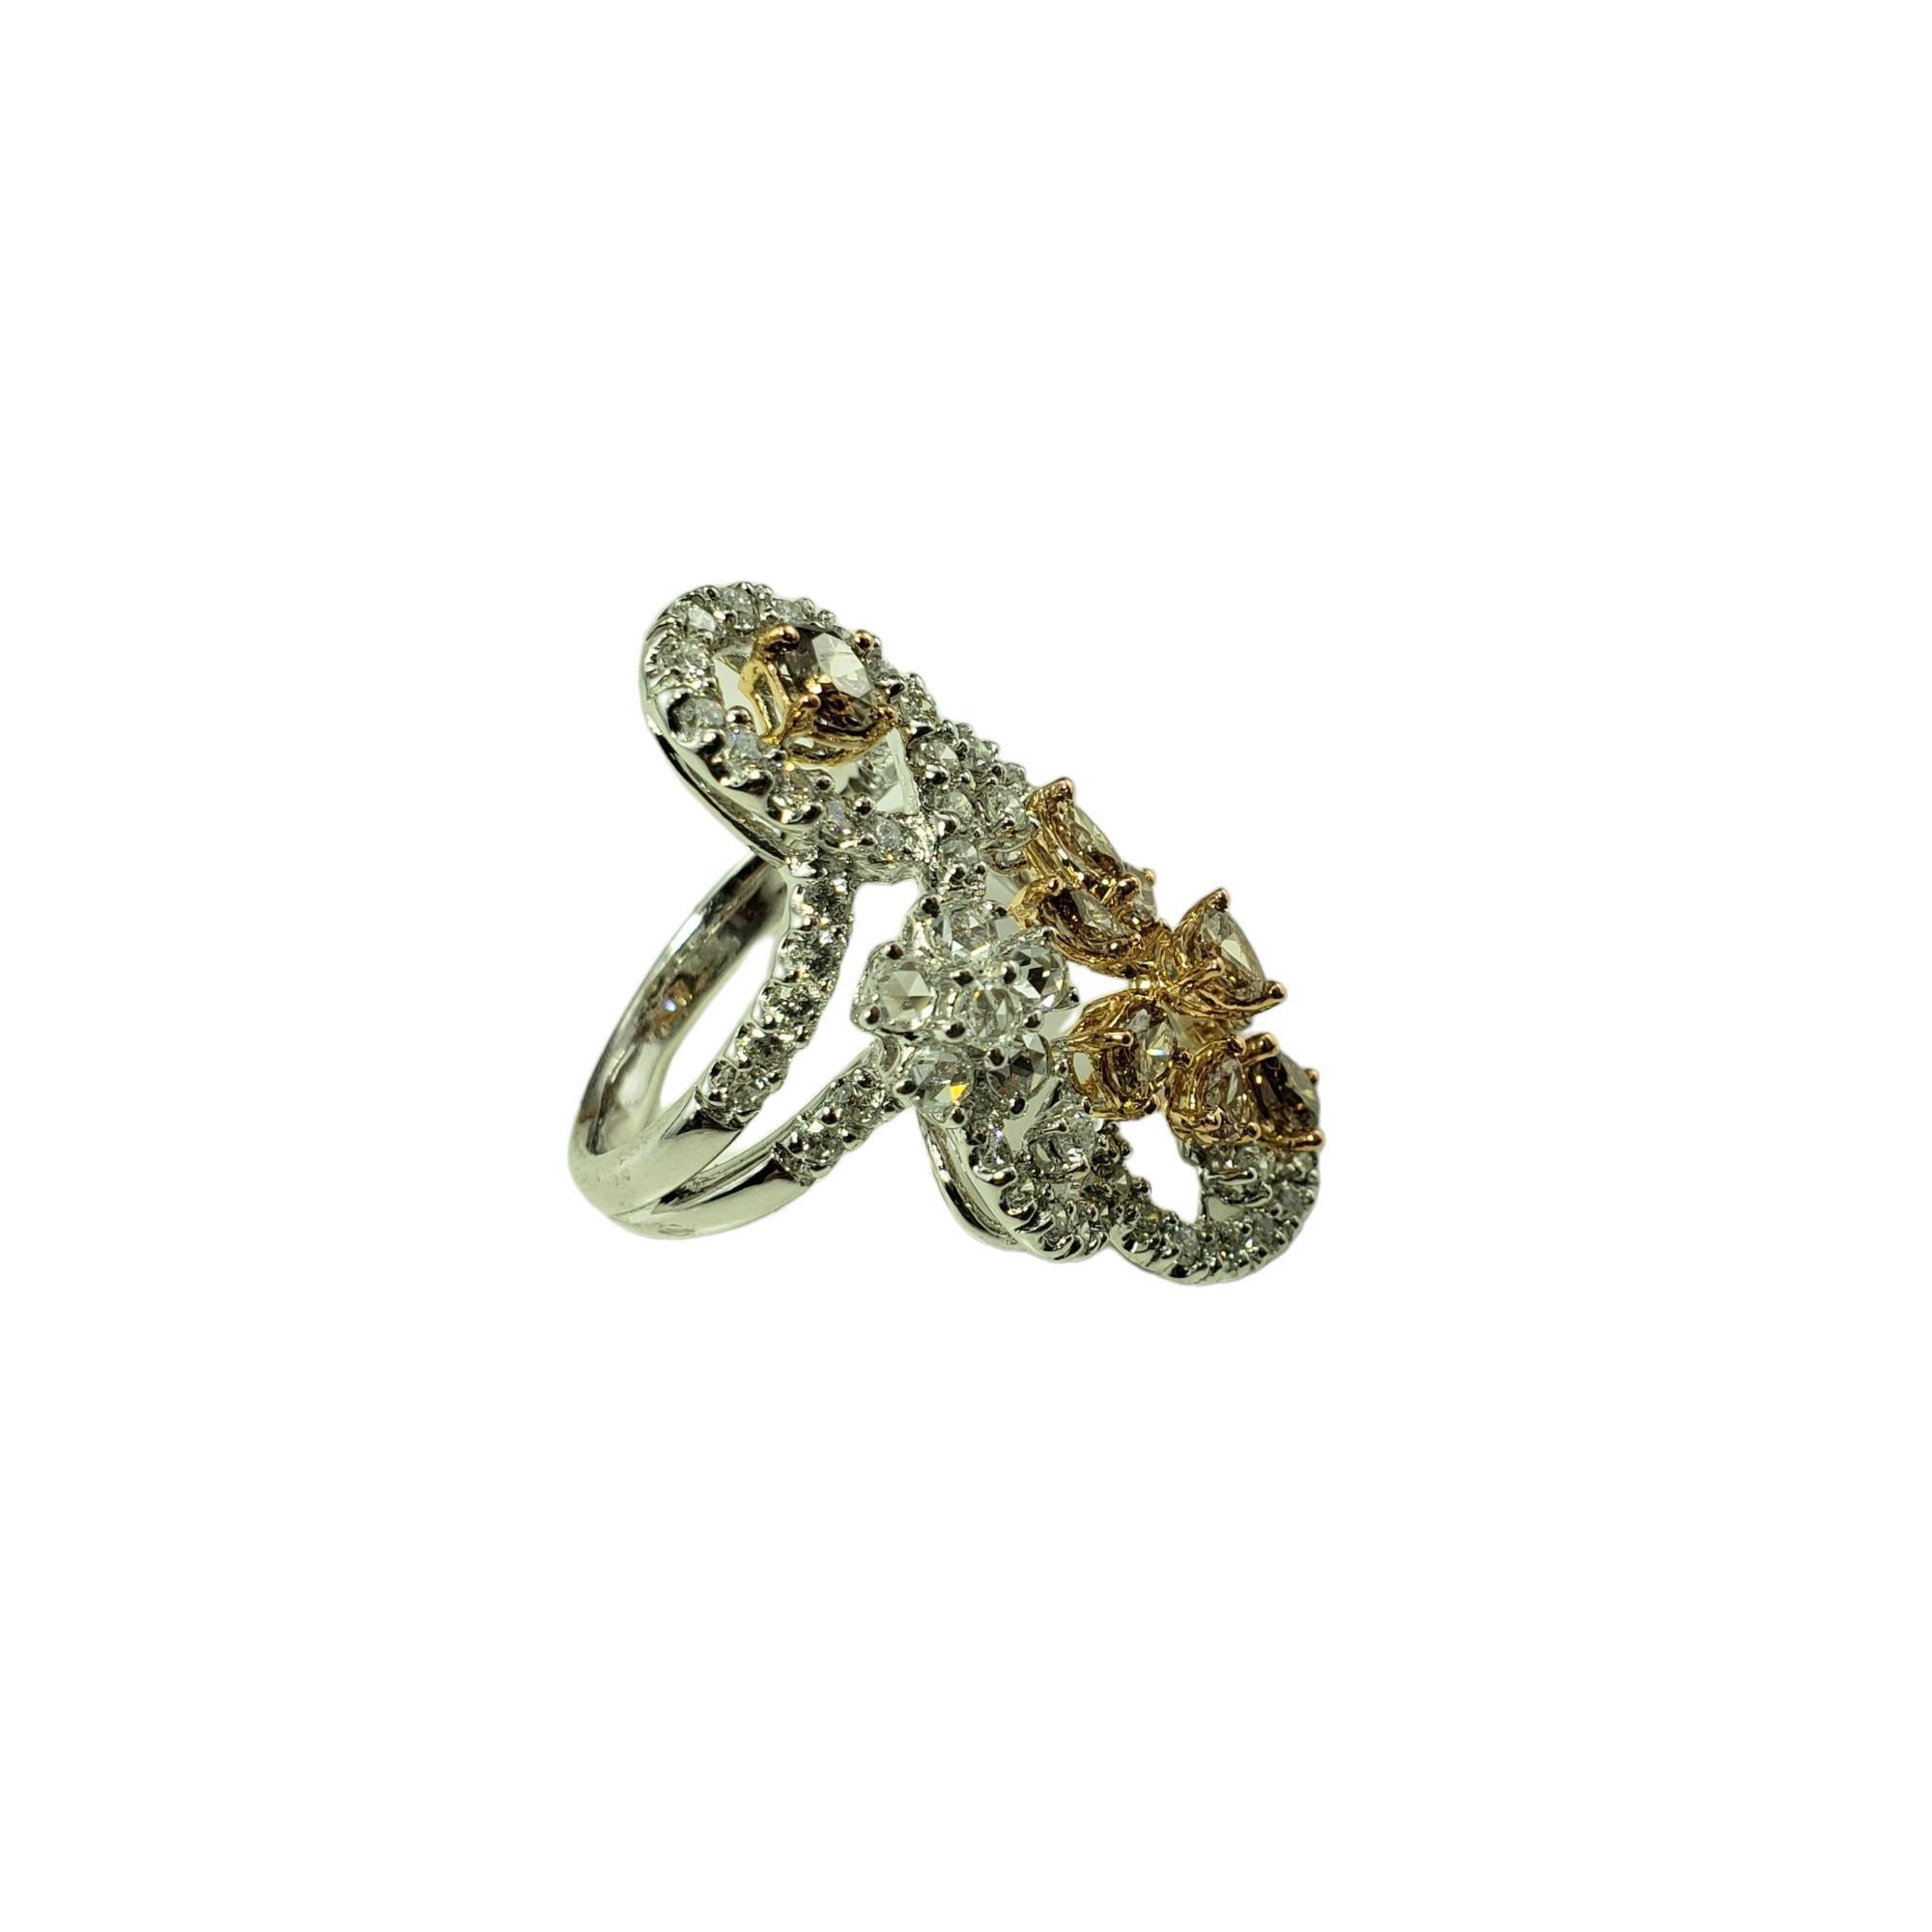 Vintage 18 Karat White Gold White and Champagne Diamond Ring Size 6.5 JAGi Certified-

This sparkling ring features 62 round brilliant cut diamonds and oval, marquis, rose and pear cut champagne diamonds set in beautifully crafted 18K white gold. 